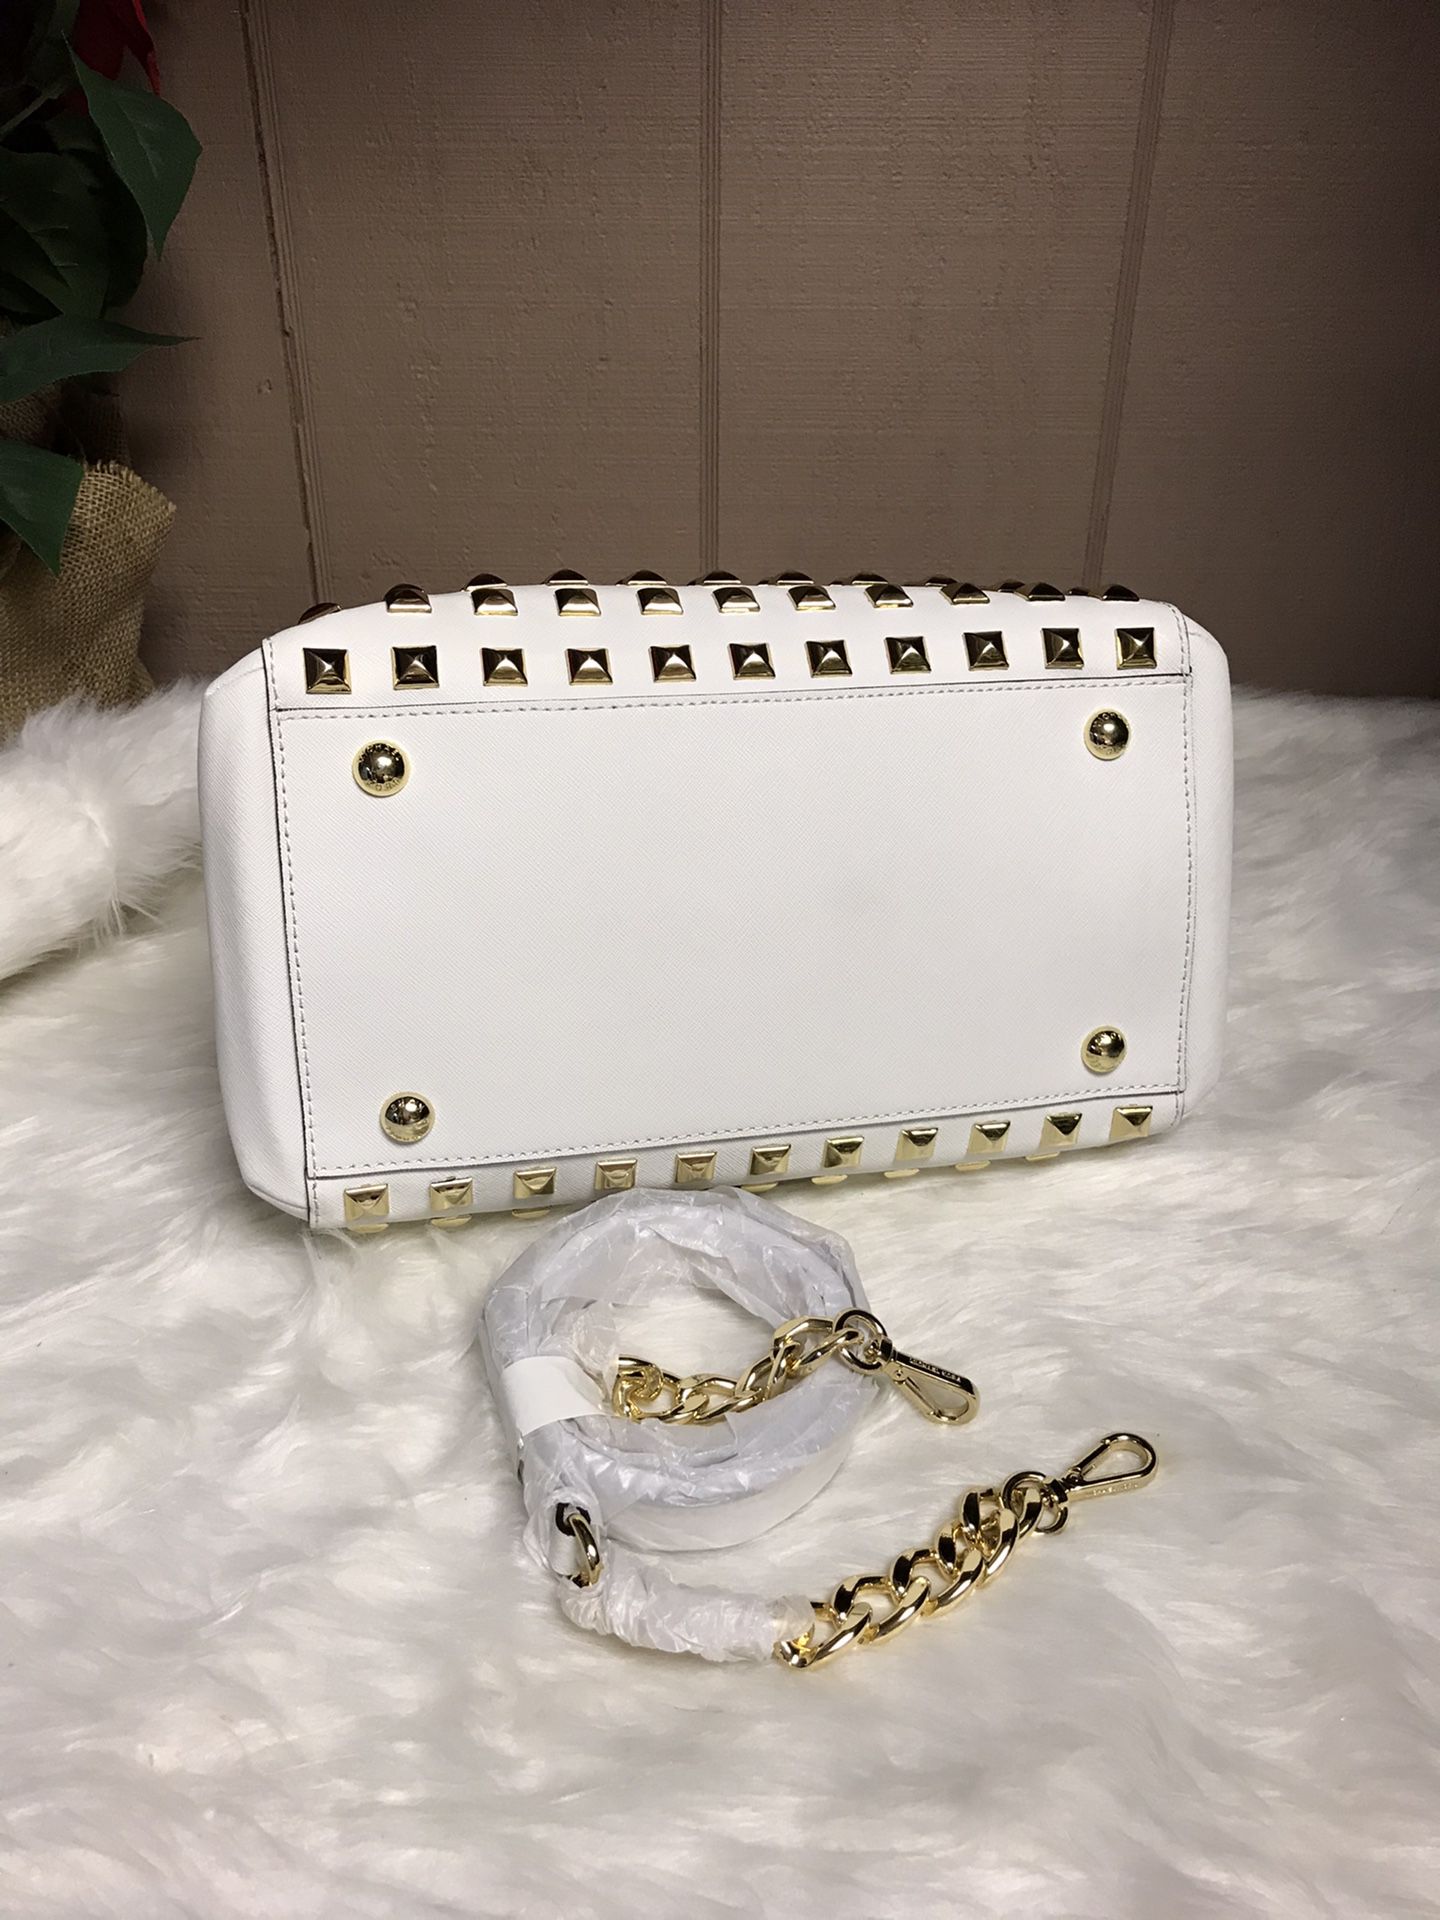 Michael Kors Purse & Wallet Set for Sale in Marshall, VA - OfferUp